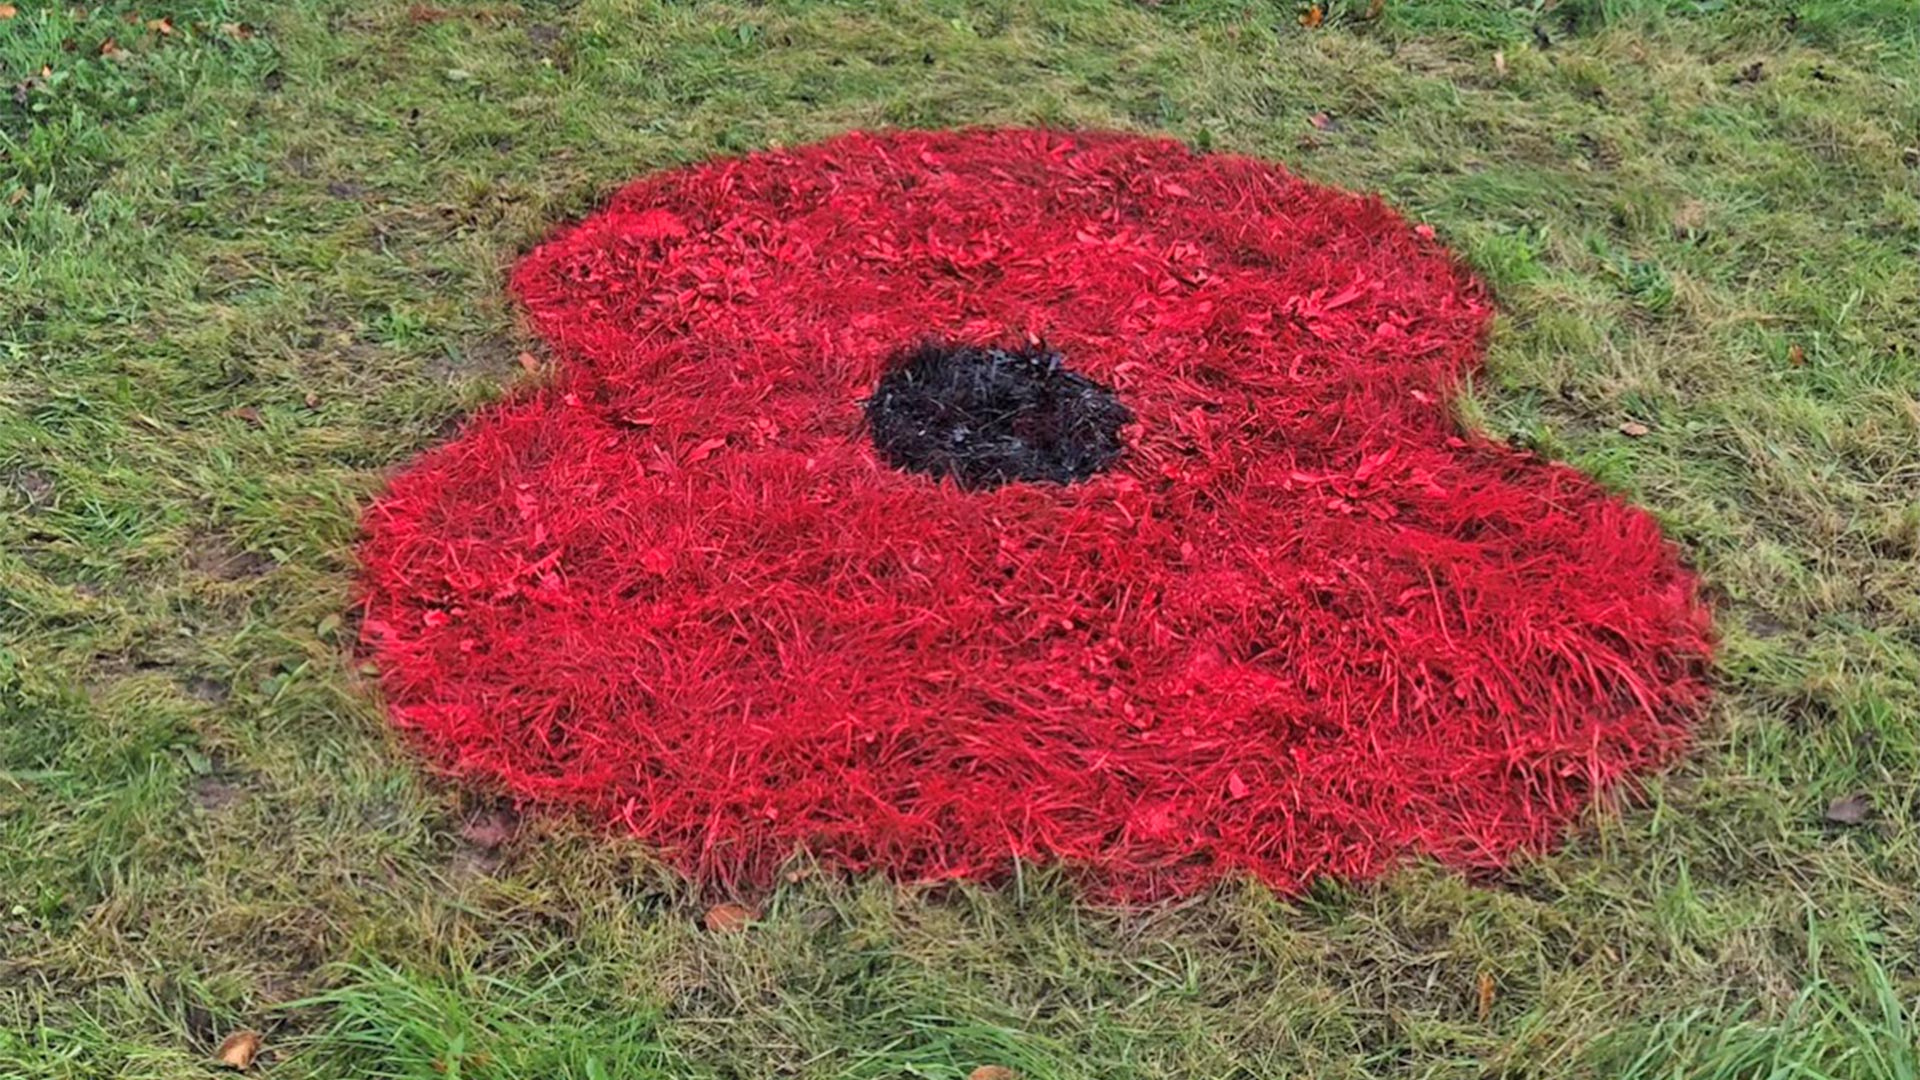 A poppy that has been painted onto a roundabout